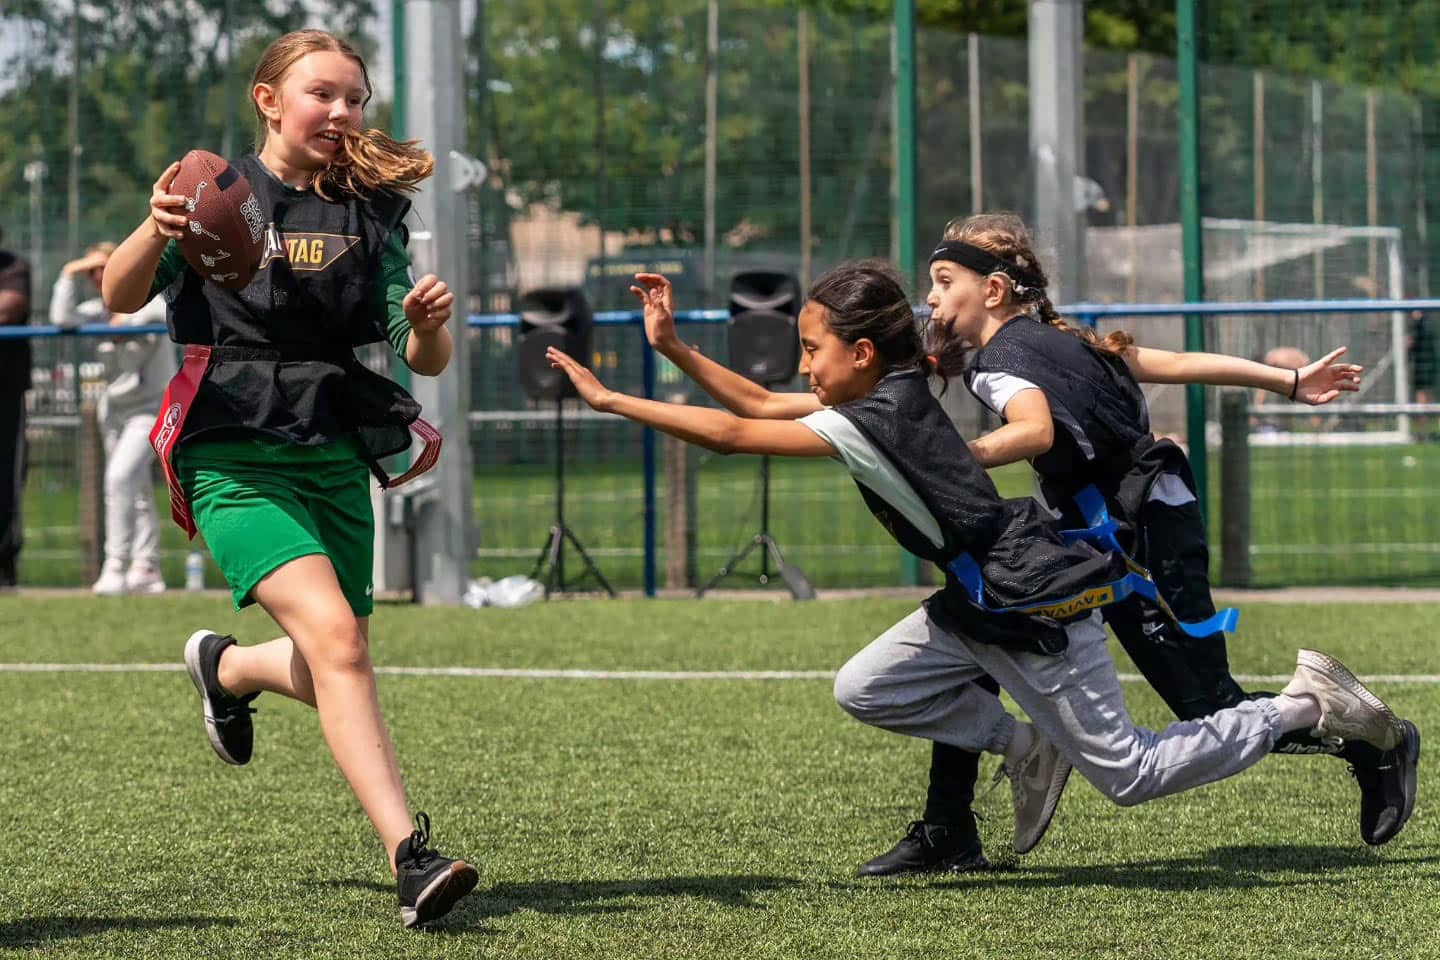 All Female JagTag Tournament in Manchester, July 2023